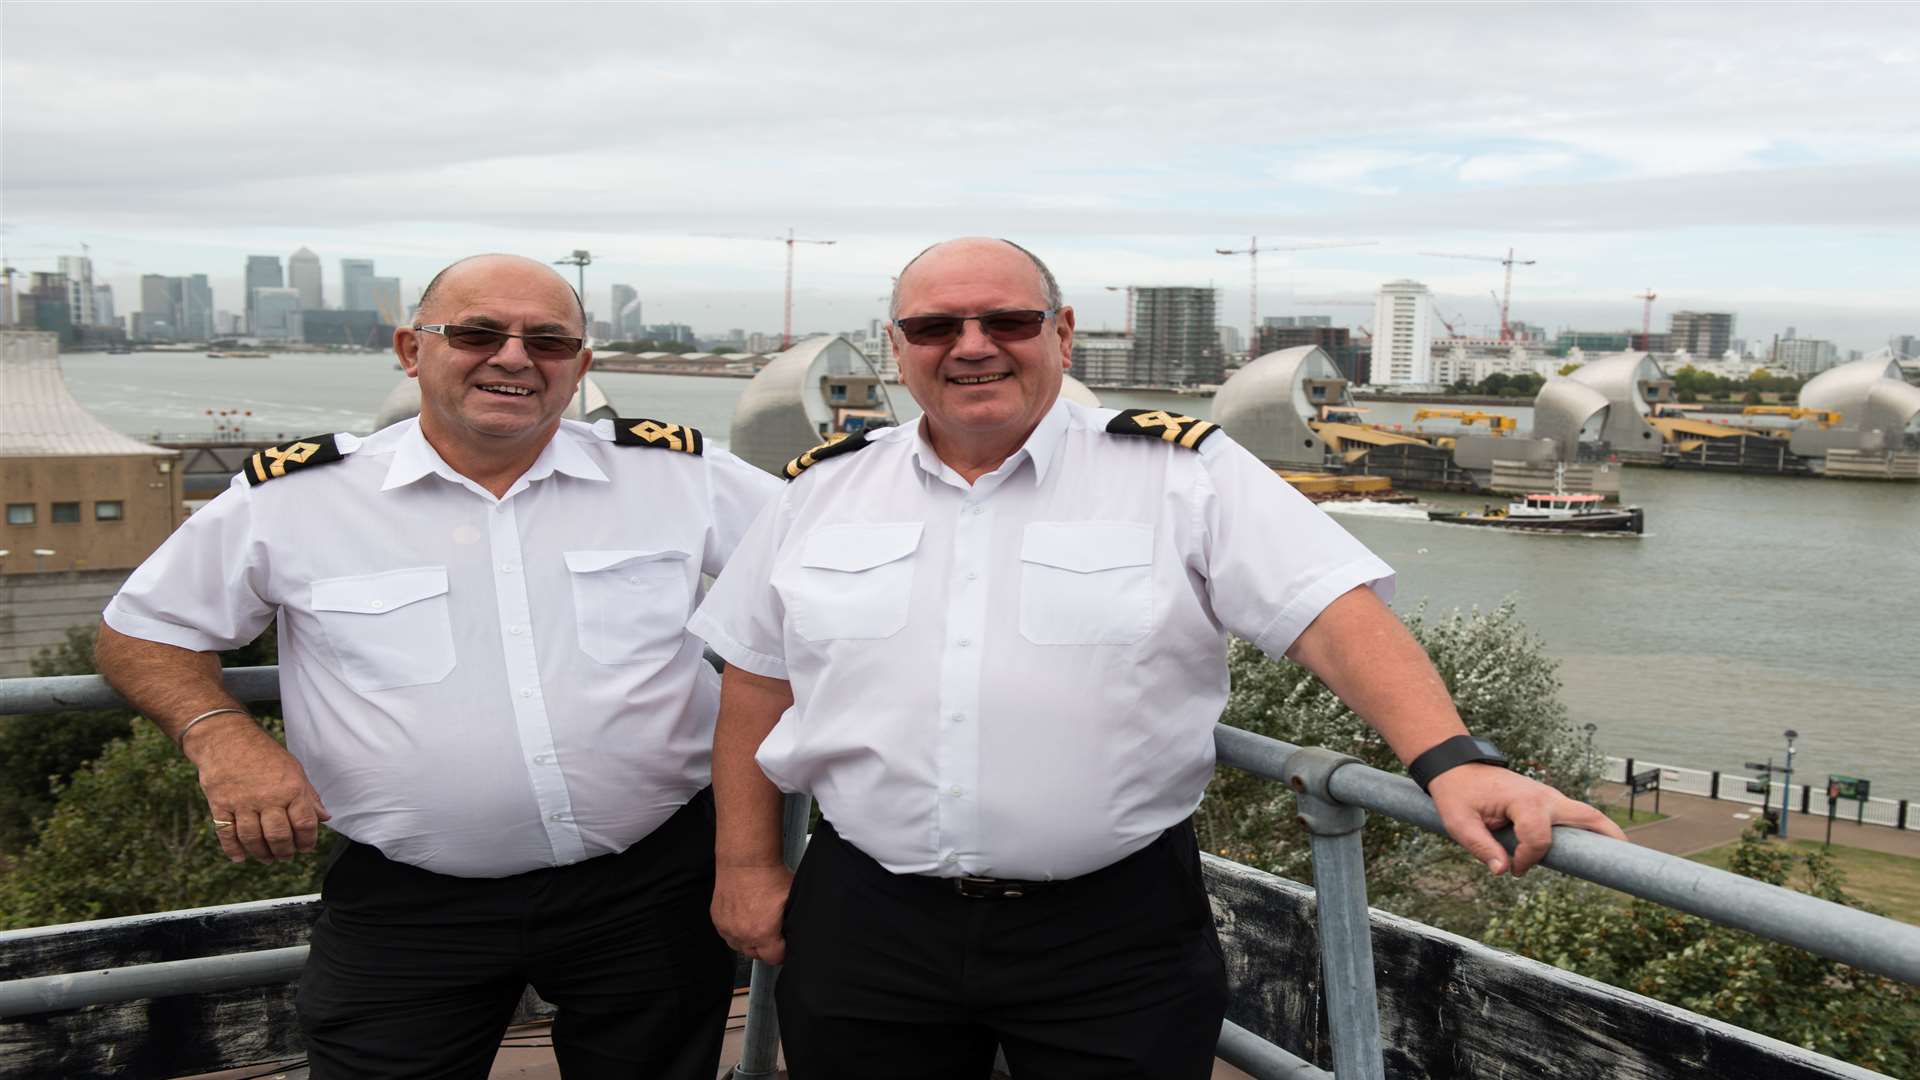 Brian Arterton and Ray MacLean worked together as a watch at Thames Barrier Navigation Centre and have retired on the same day.